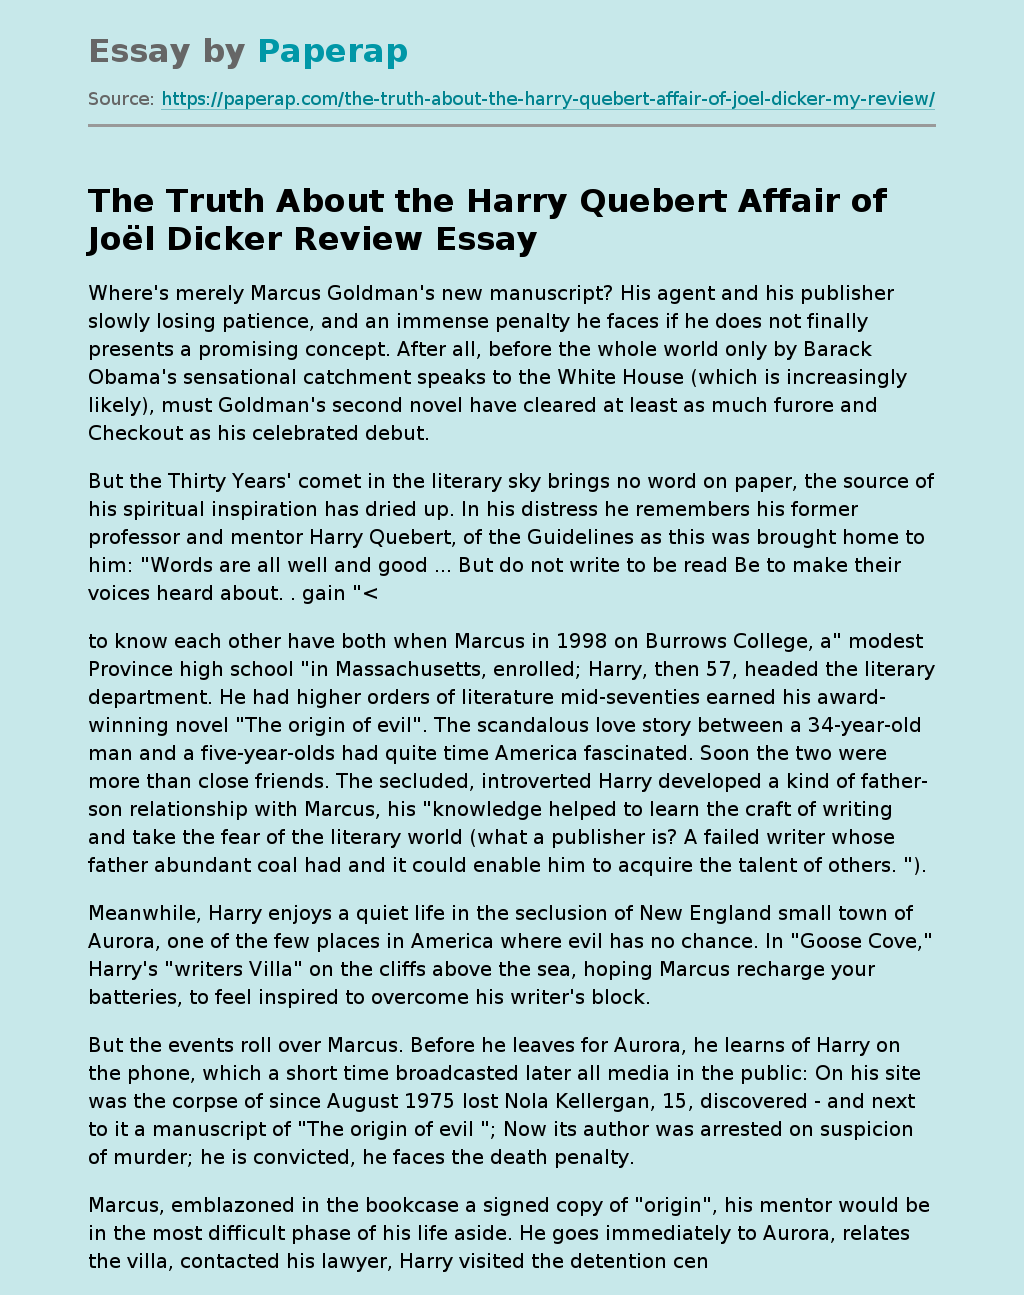 "The Truth About the Harry Quebert Affair" of Joël Dicker